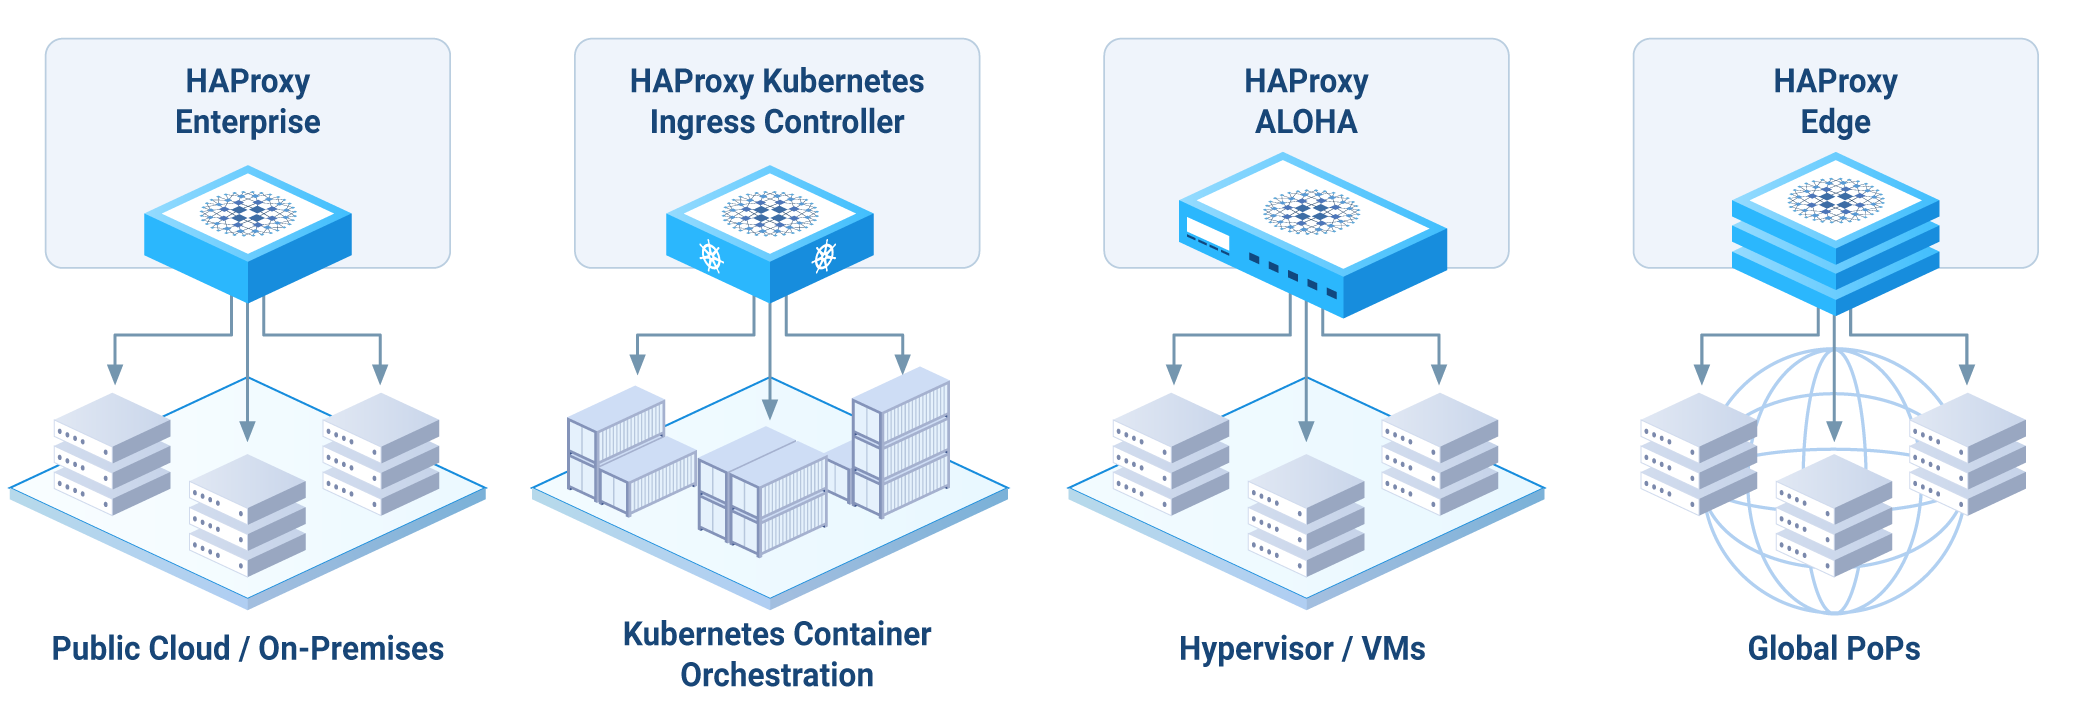 HAProxy Fusion Product Integrations